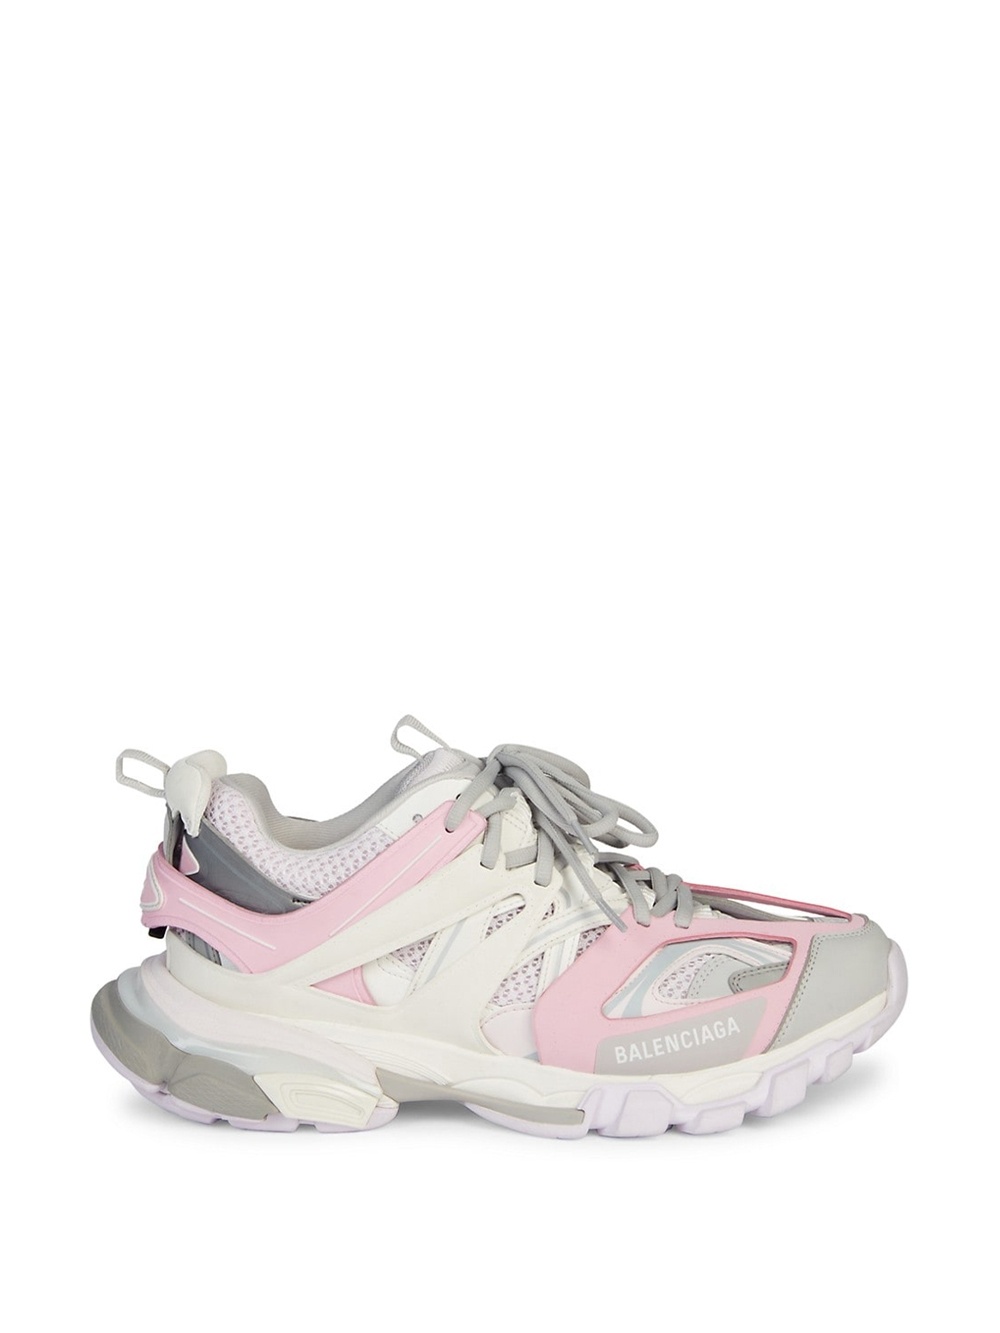 LED Track Sneaker Grey Pink and White - 1